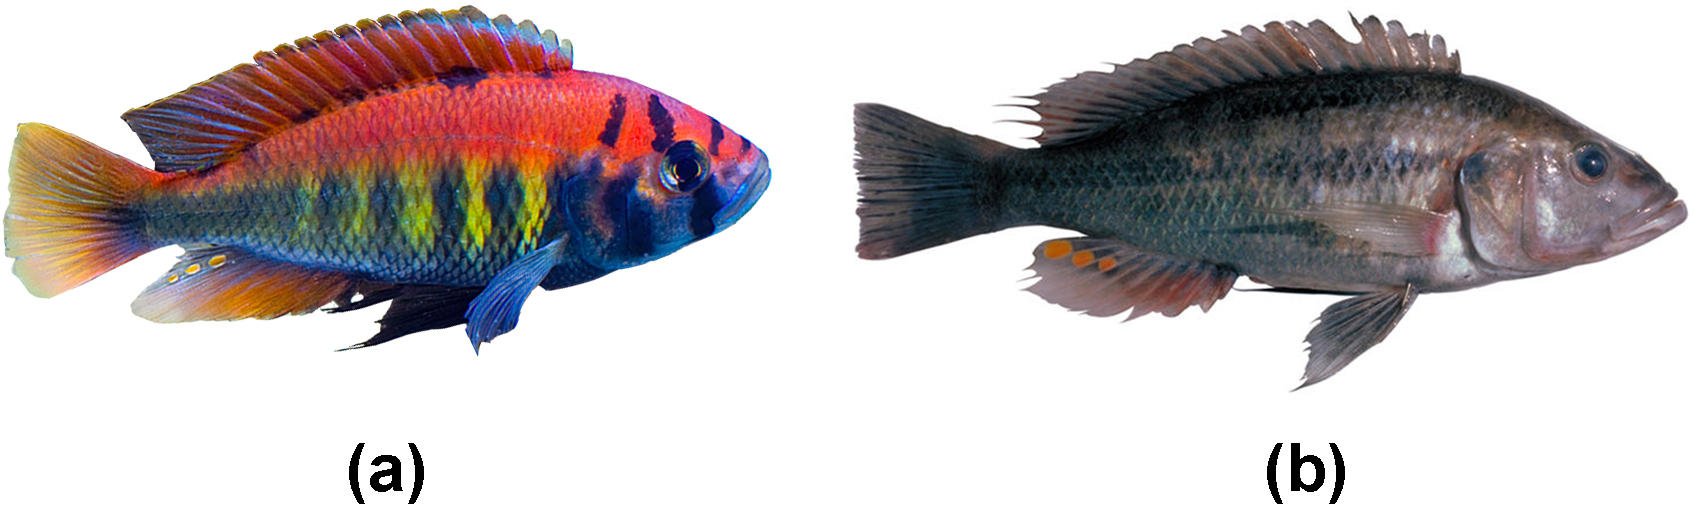 photo a shows a brilliantly colored rainbow fish. Photo b shows a duller drab grey fish with a few spots of orange coloring.